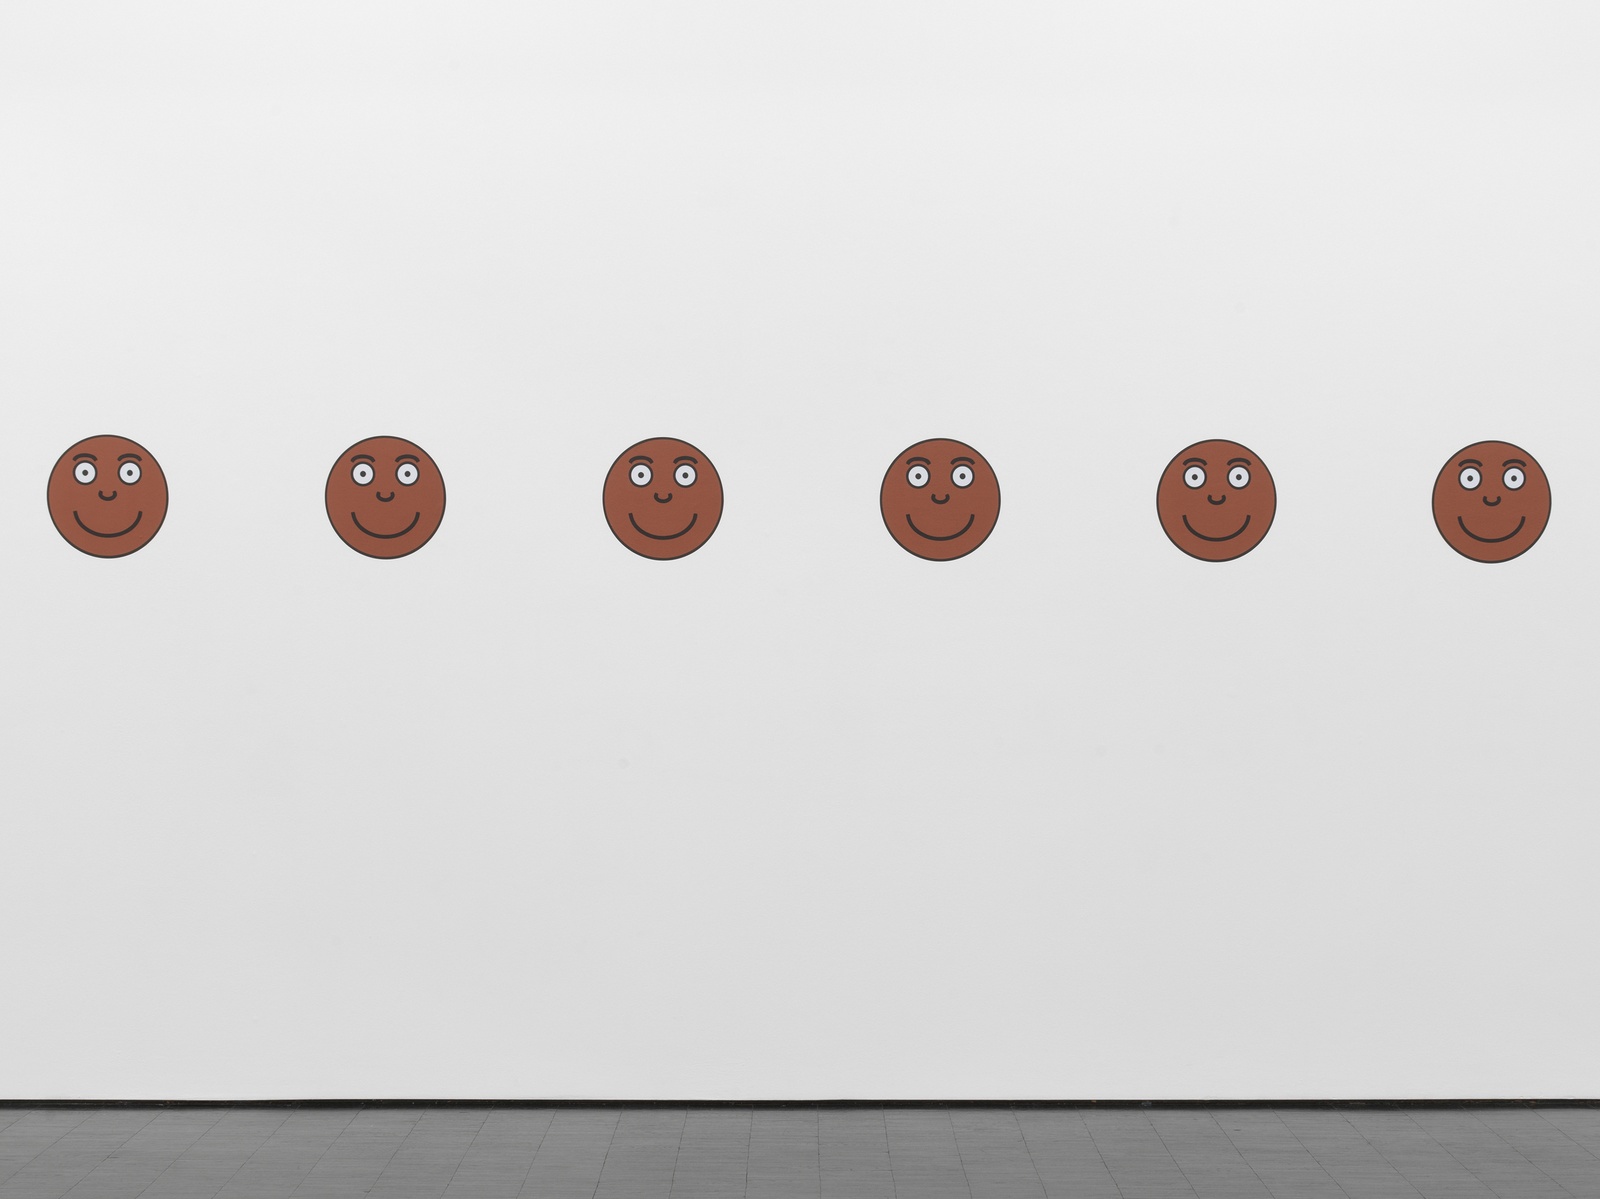 Carolyn LazardPain Scale, 2019vinylOverall: 376 x 30.5 cm | 148 × 12 in; 6 parts, each: 30.5 × 30.5 cm | 148 × 12 in